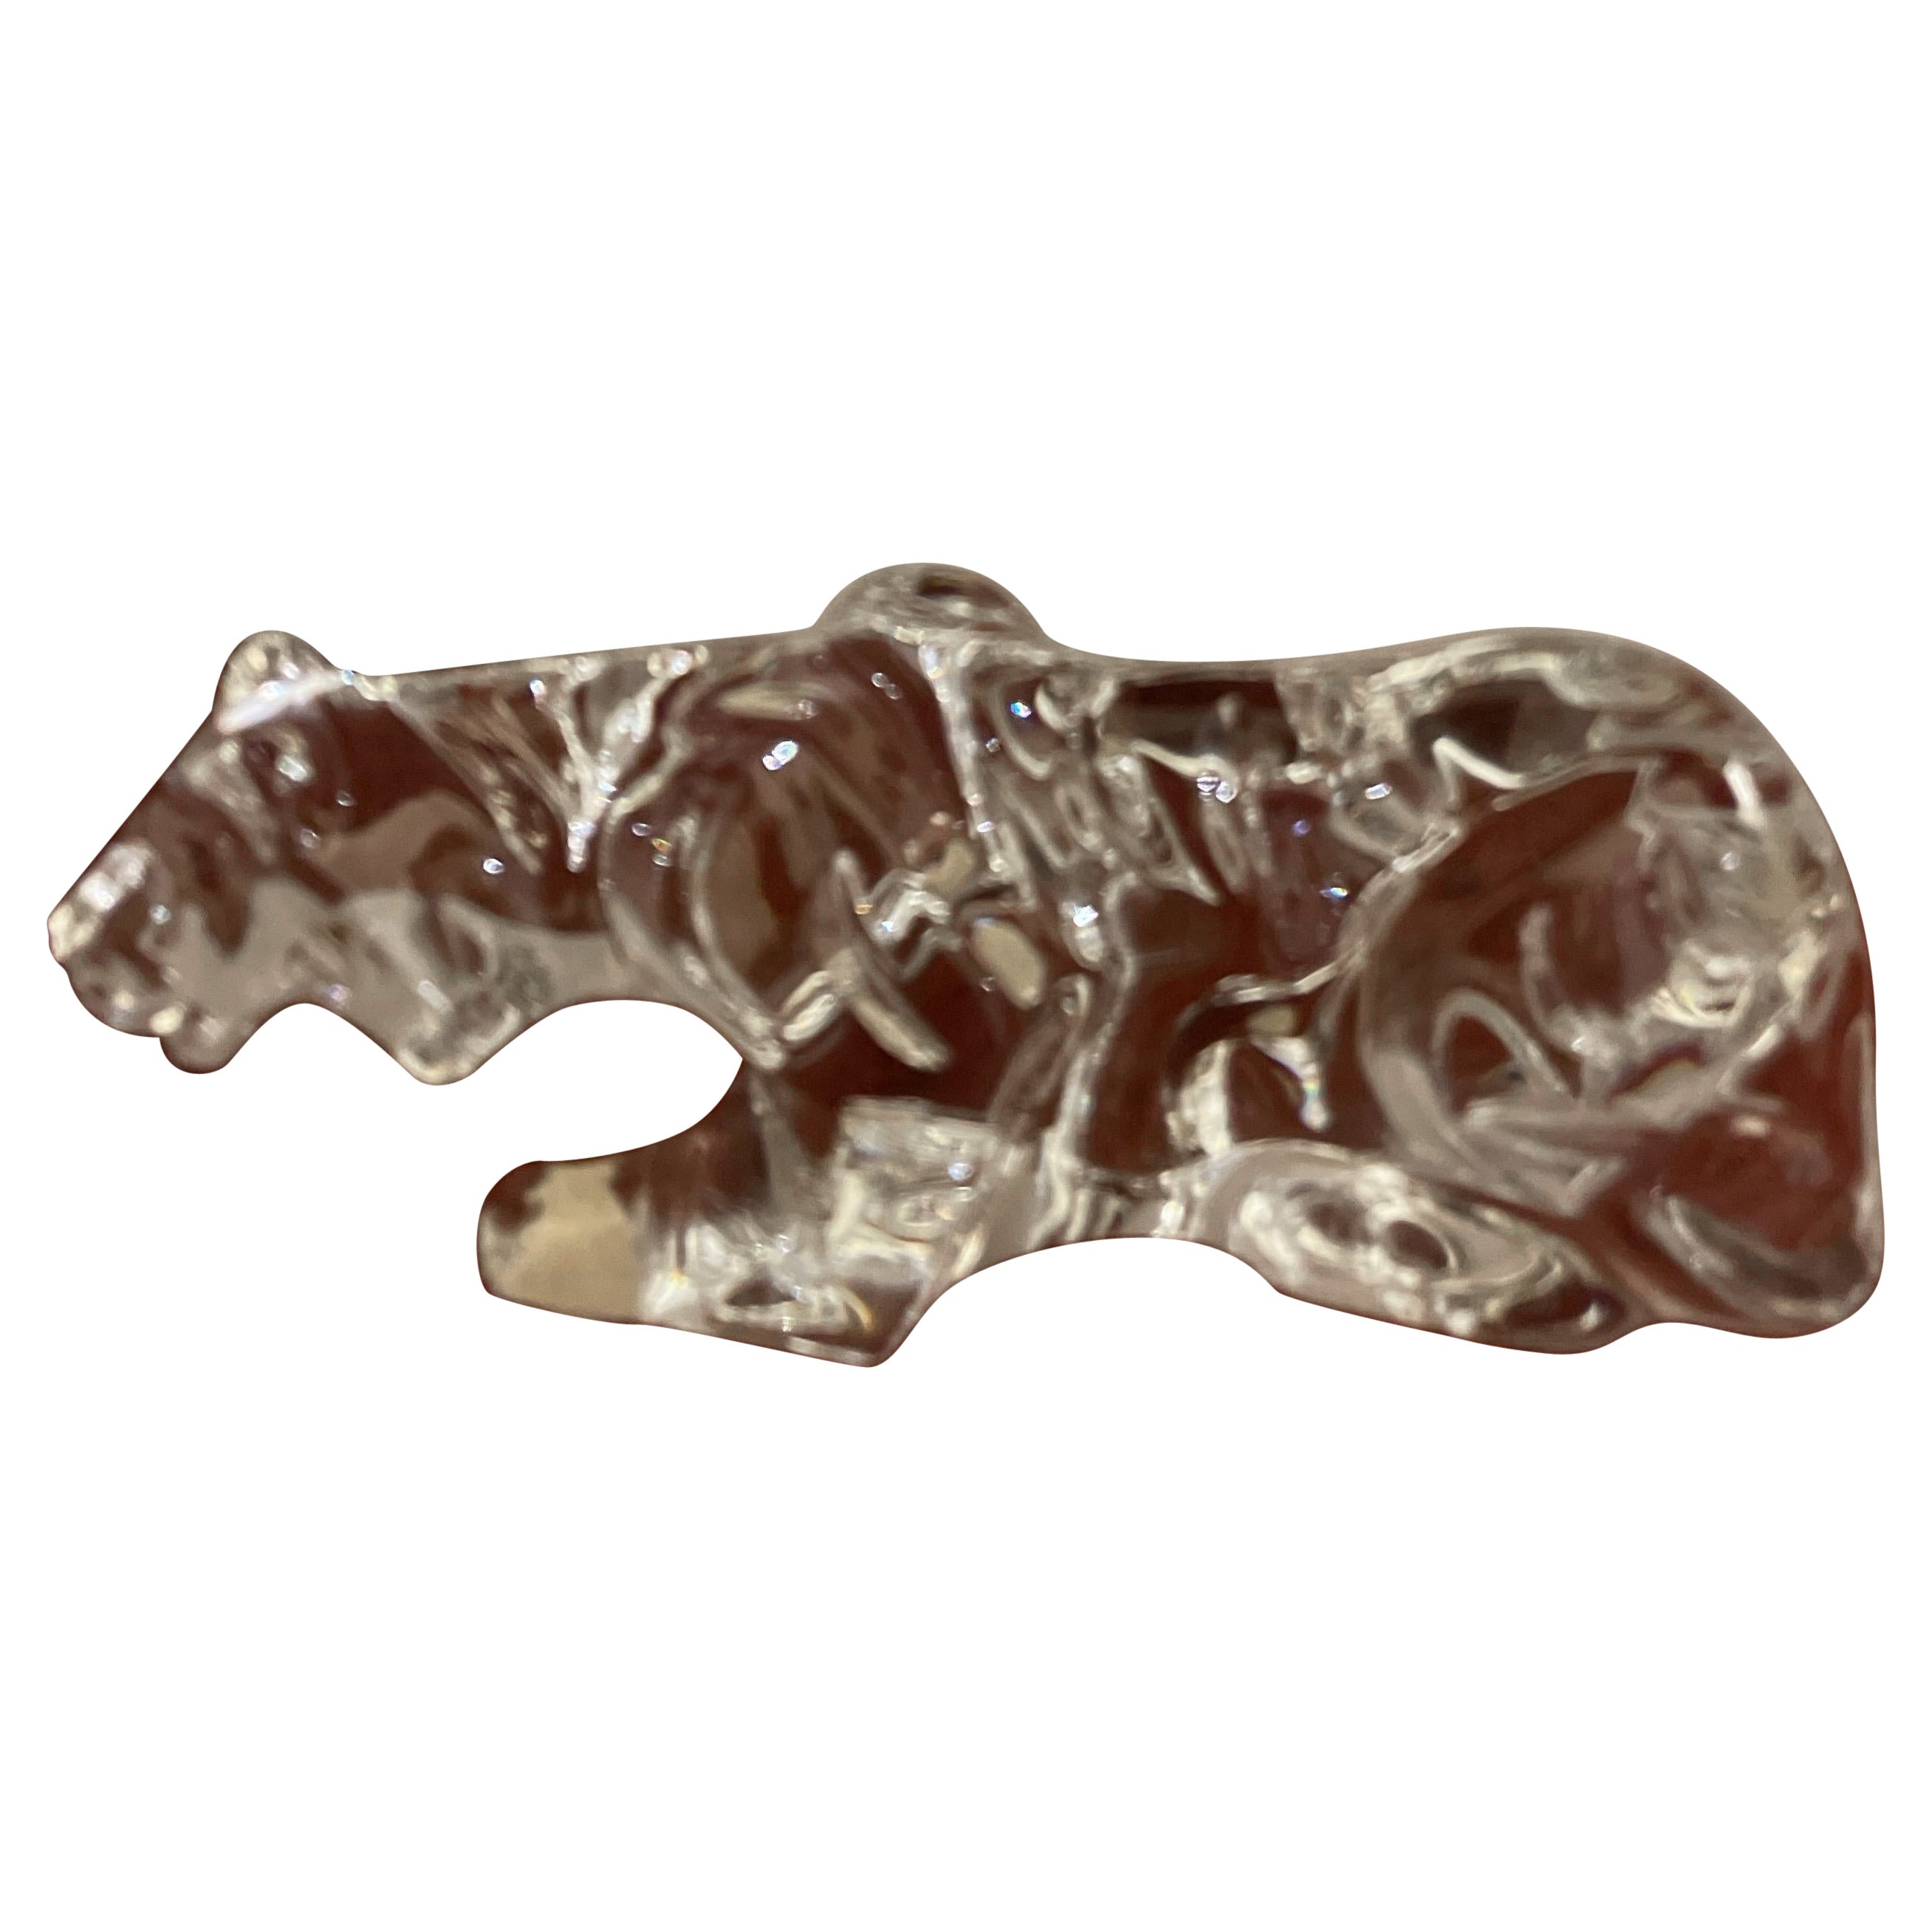 Baccarat Crystal Figurine / Paperweight of a Tiger For Sale